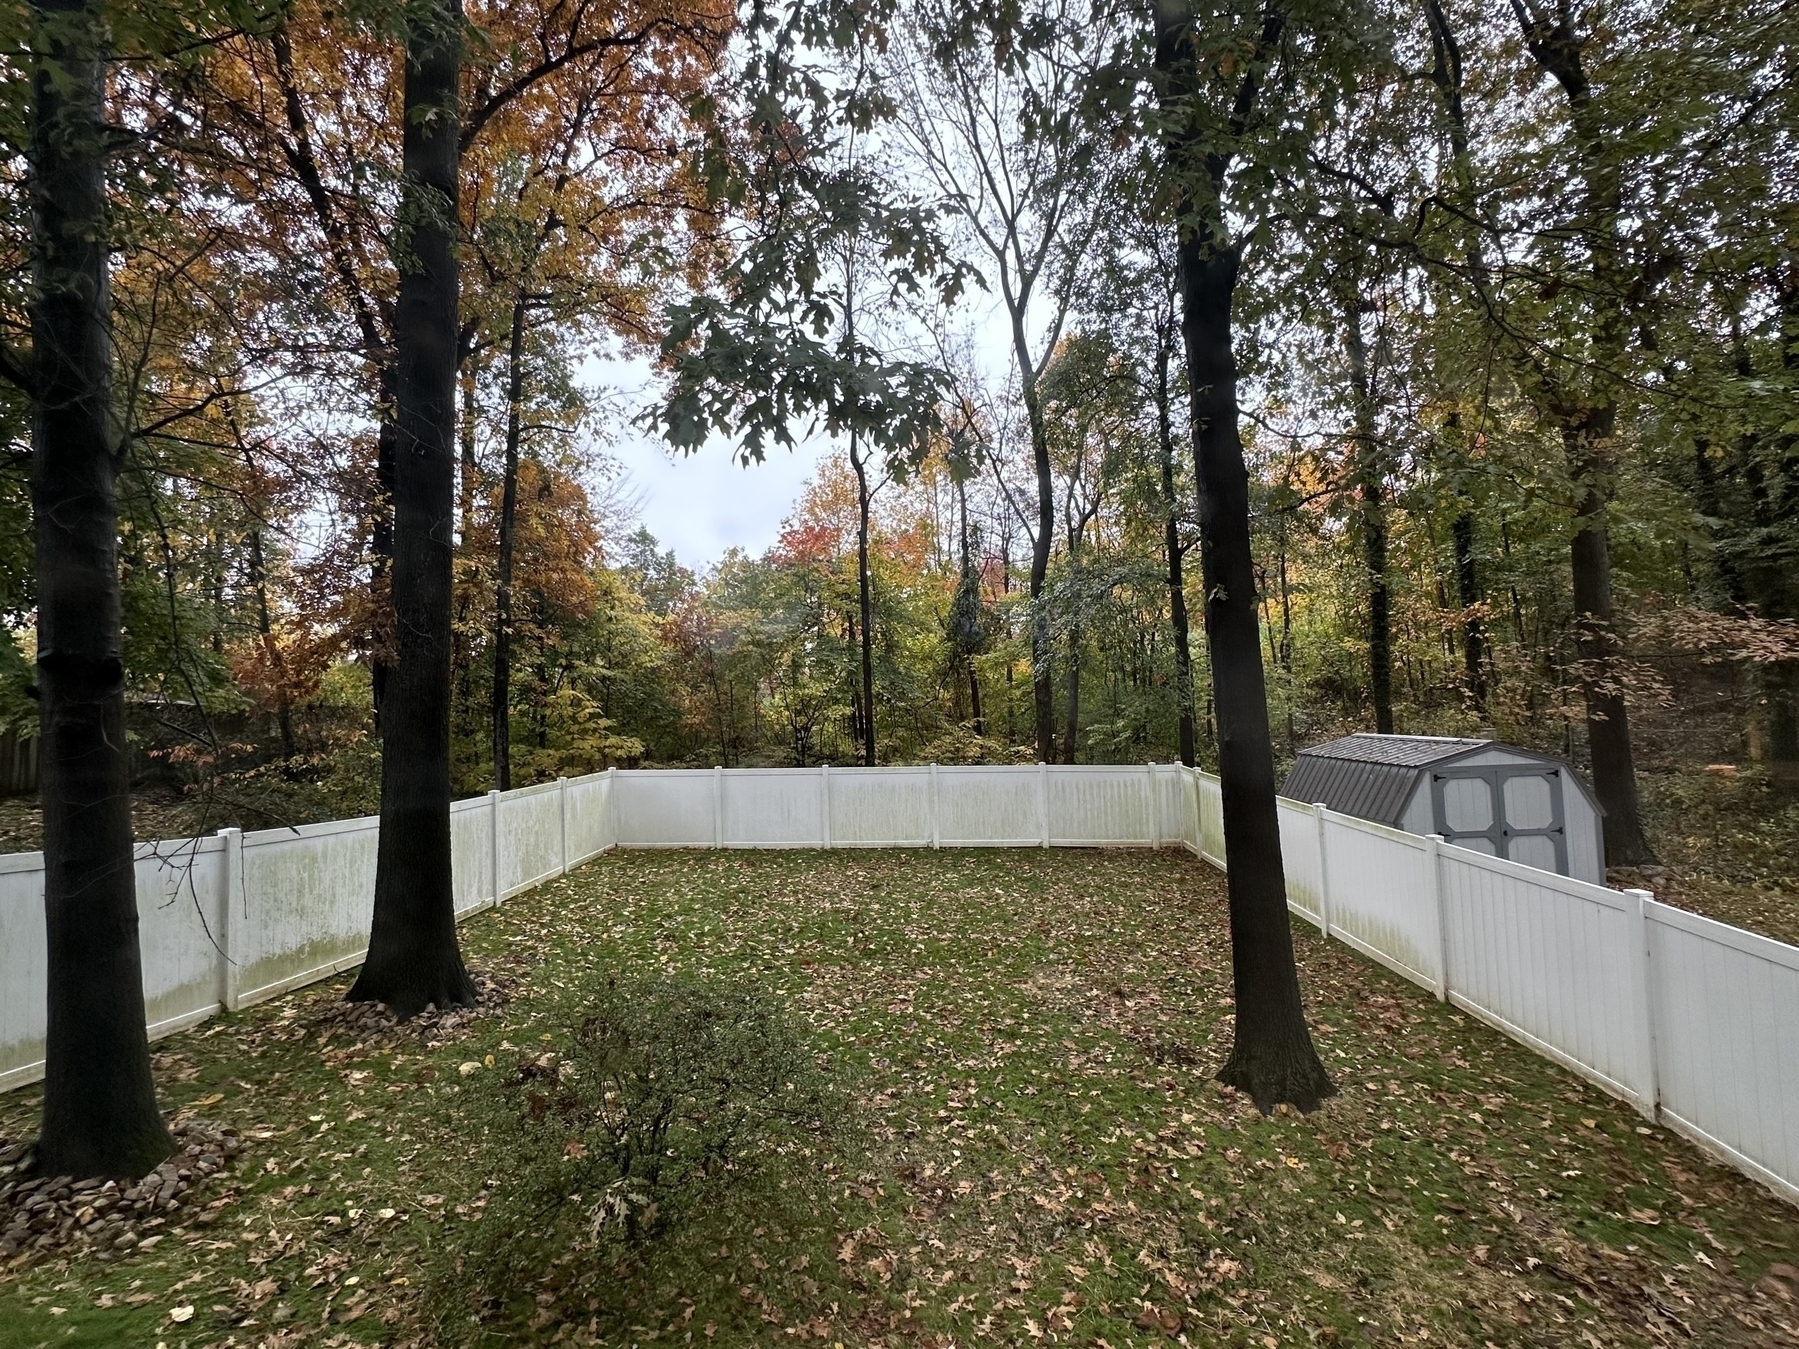 Green backyard with white privacy fence. Trees in the background turning autumn colors